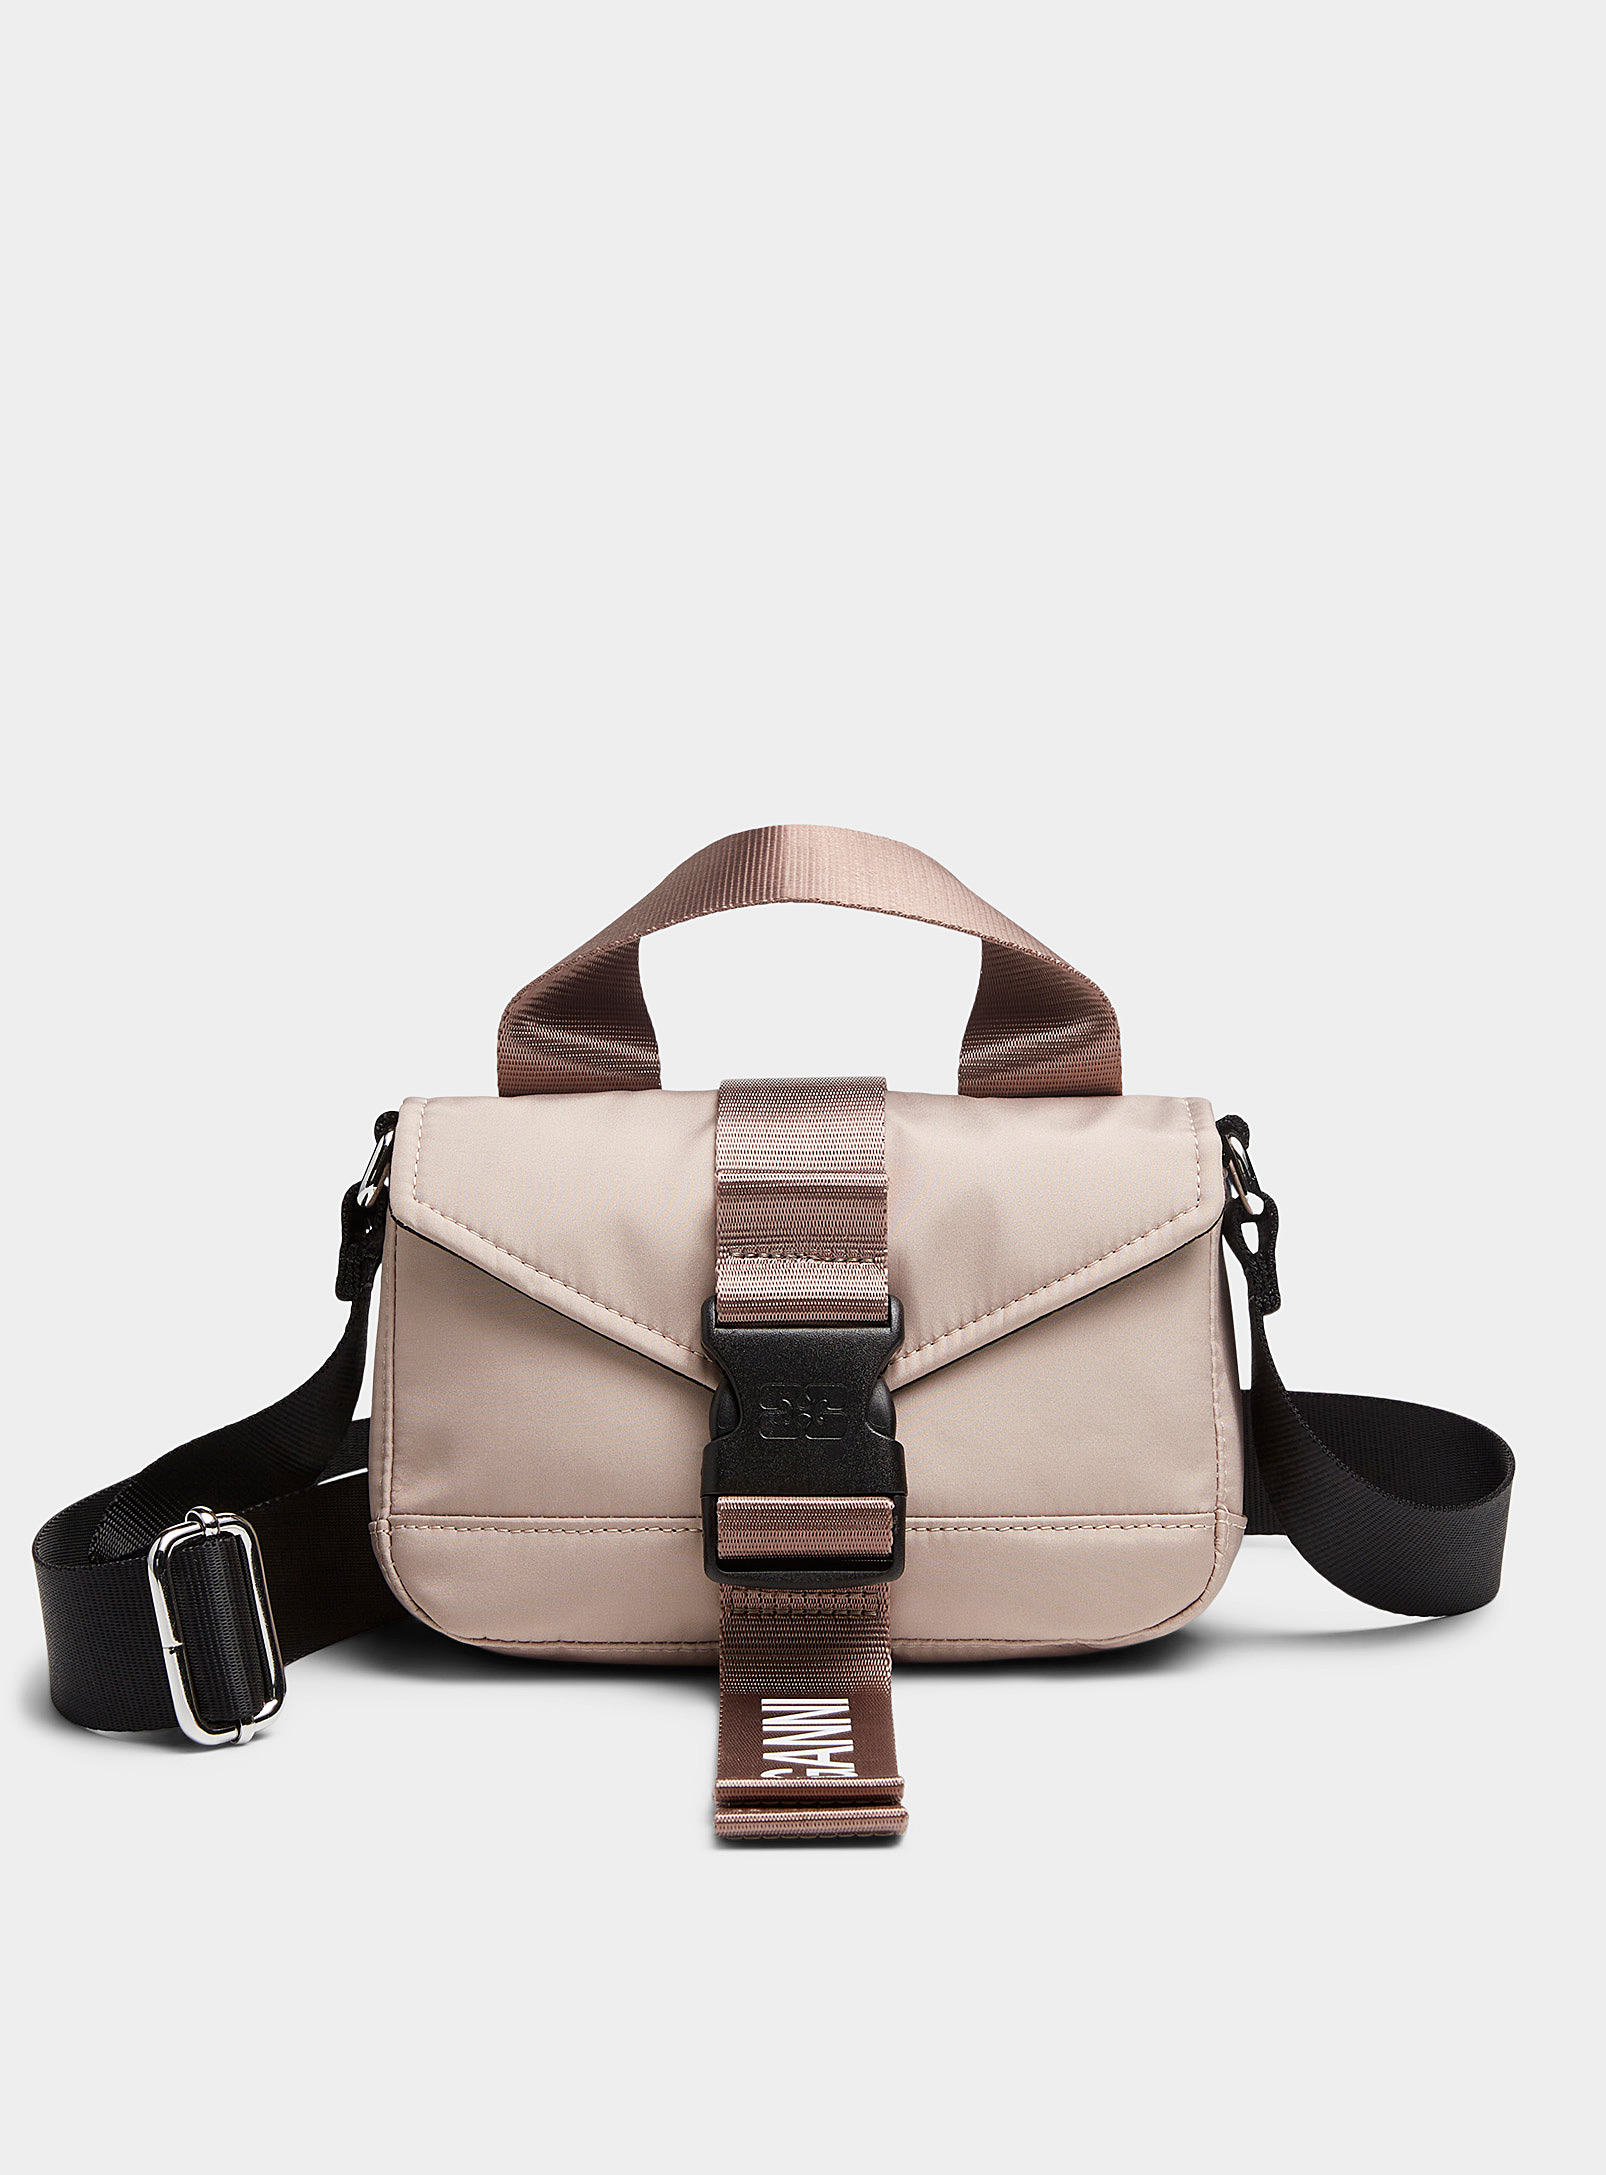 Ganni Signature Buckle Recycled Fabric Flap Taupe Bag In Brown